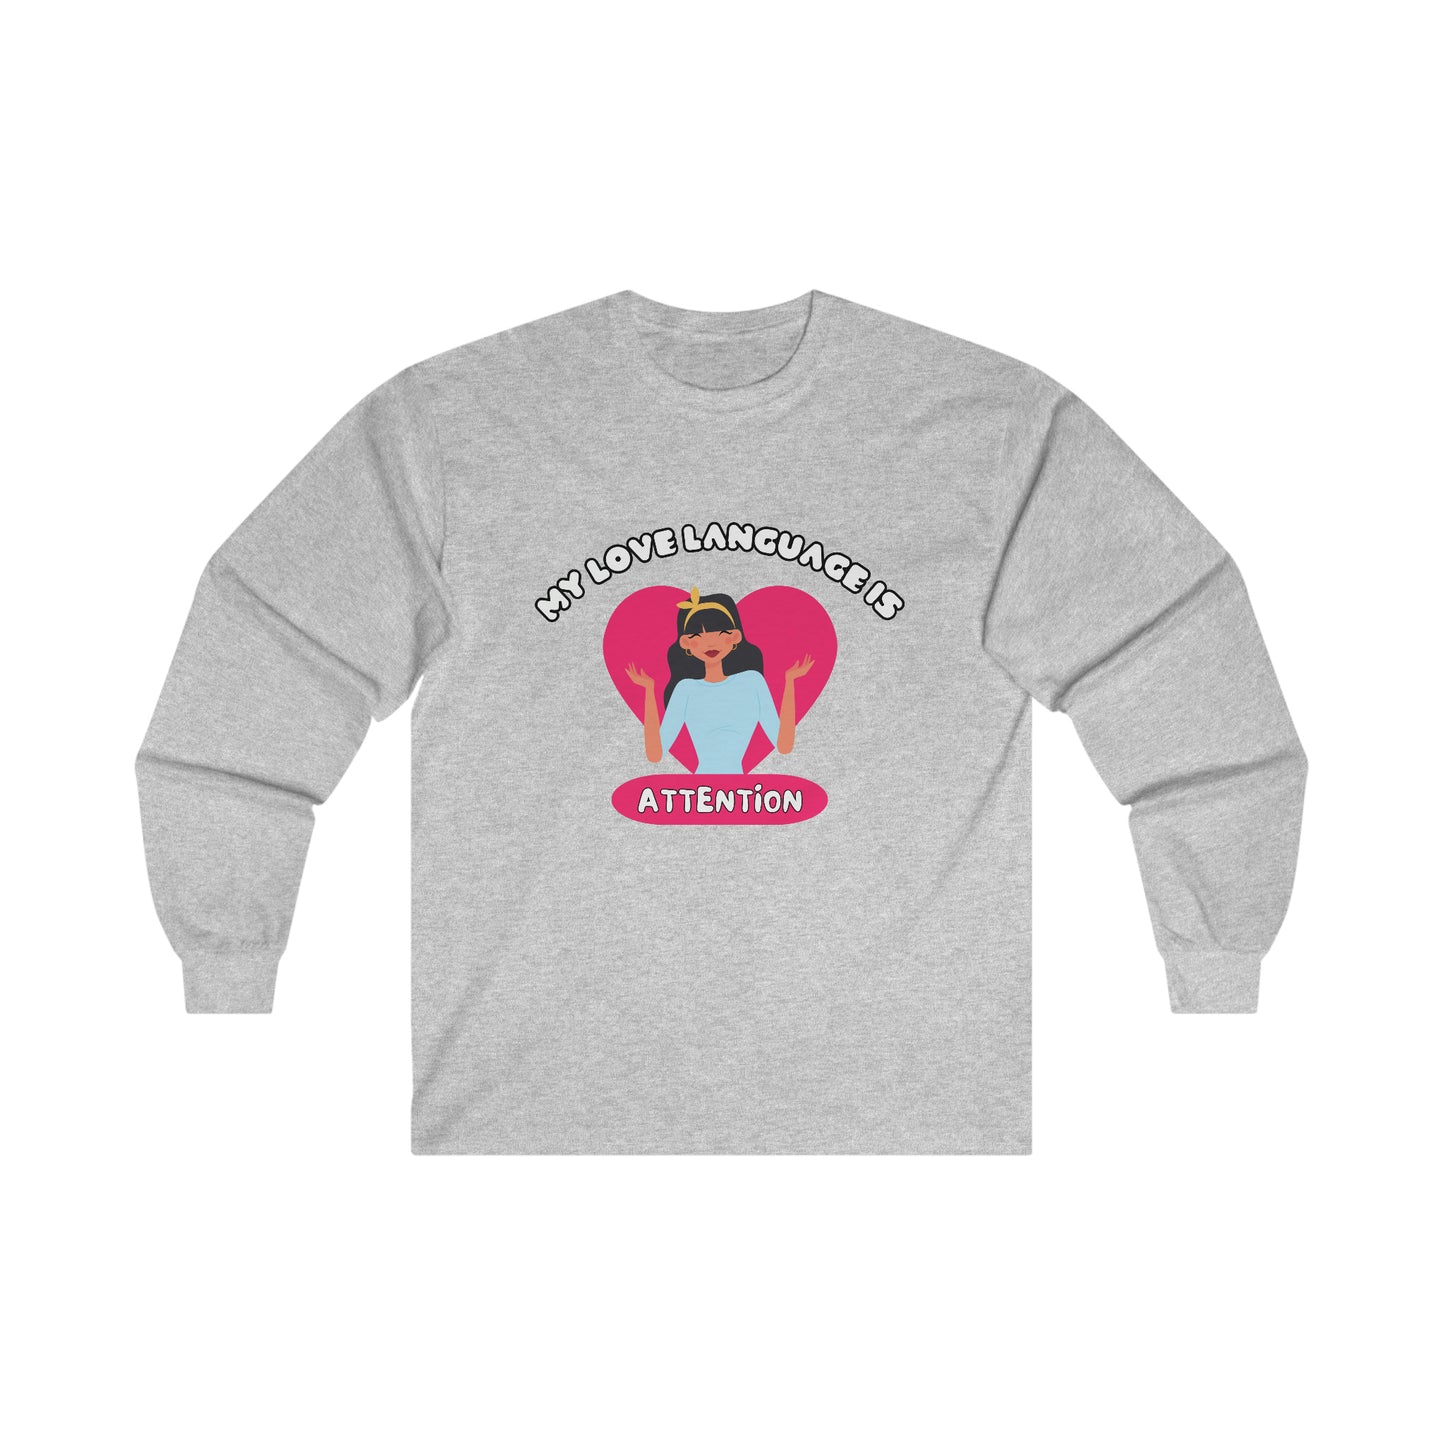 My Love Language Is Attention - Unisex Long Sleeve Tee